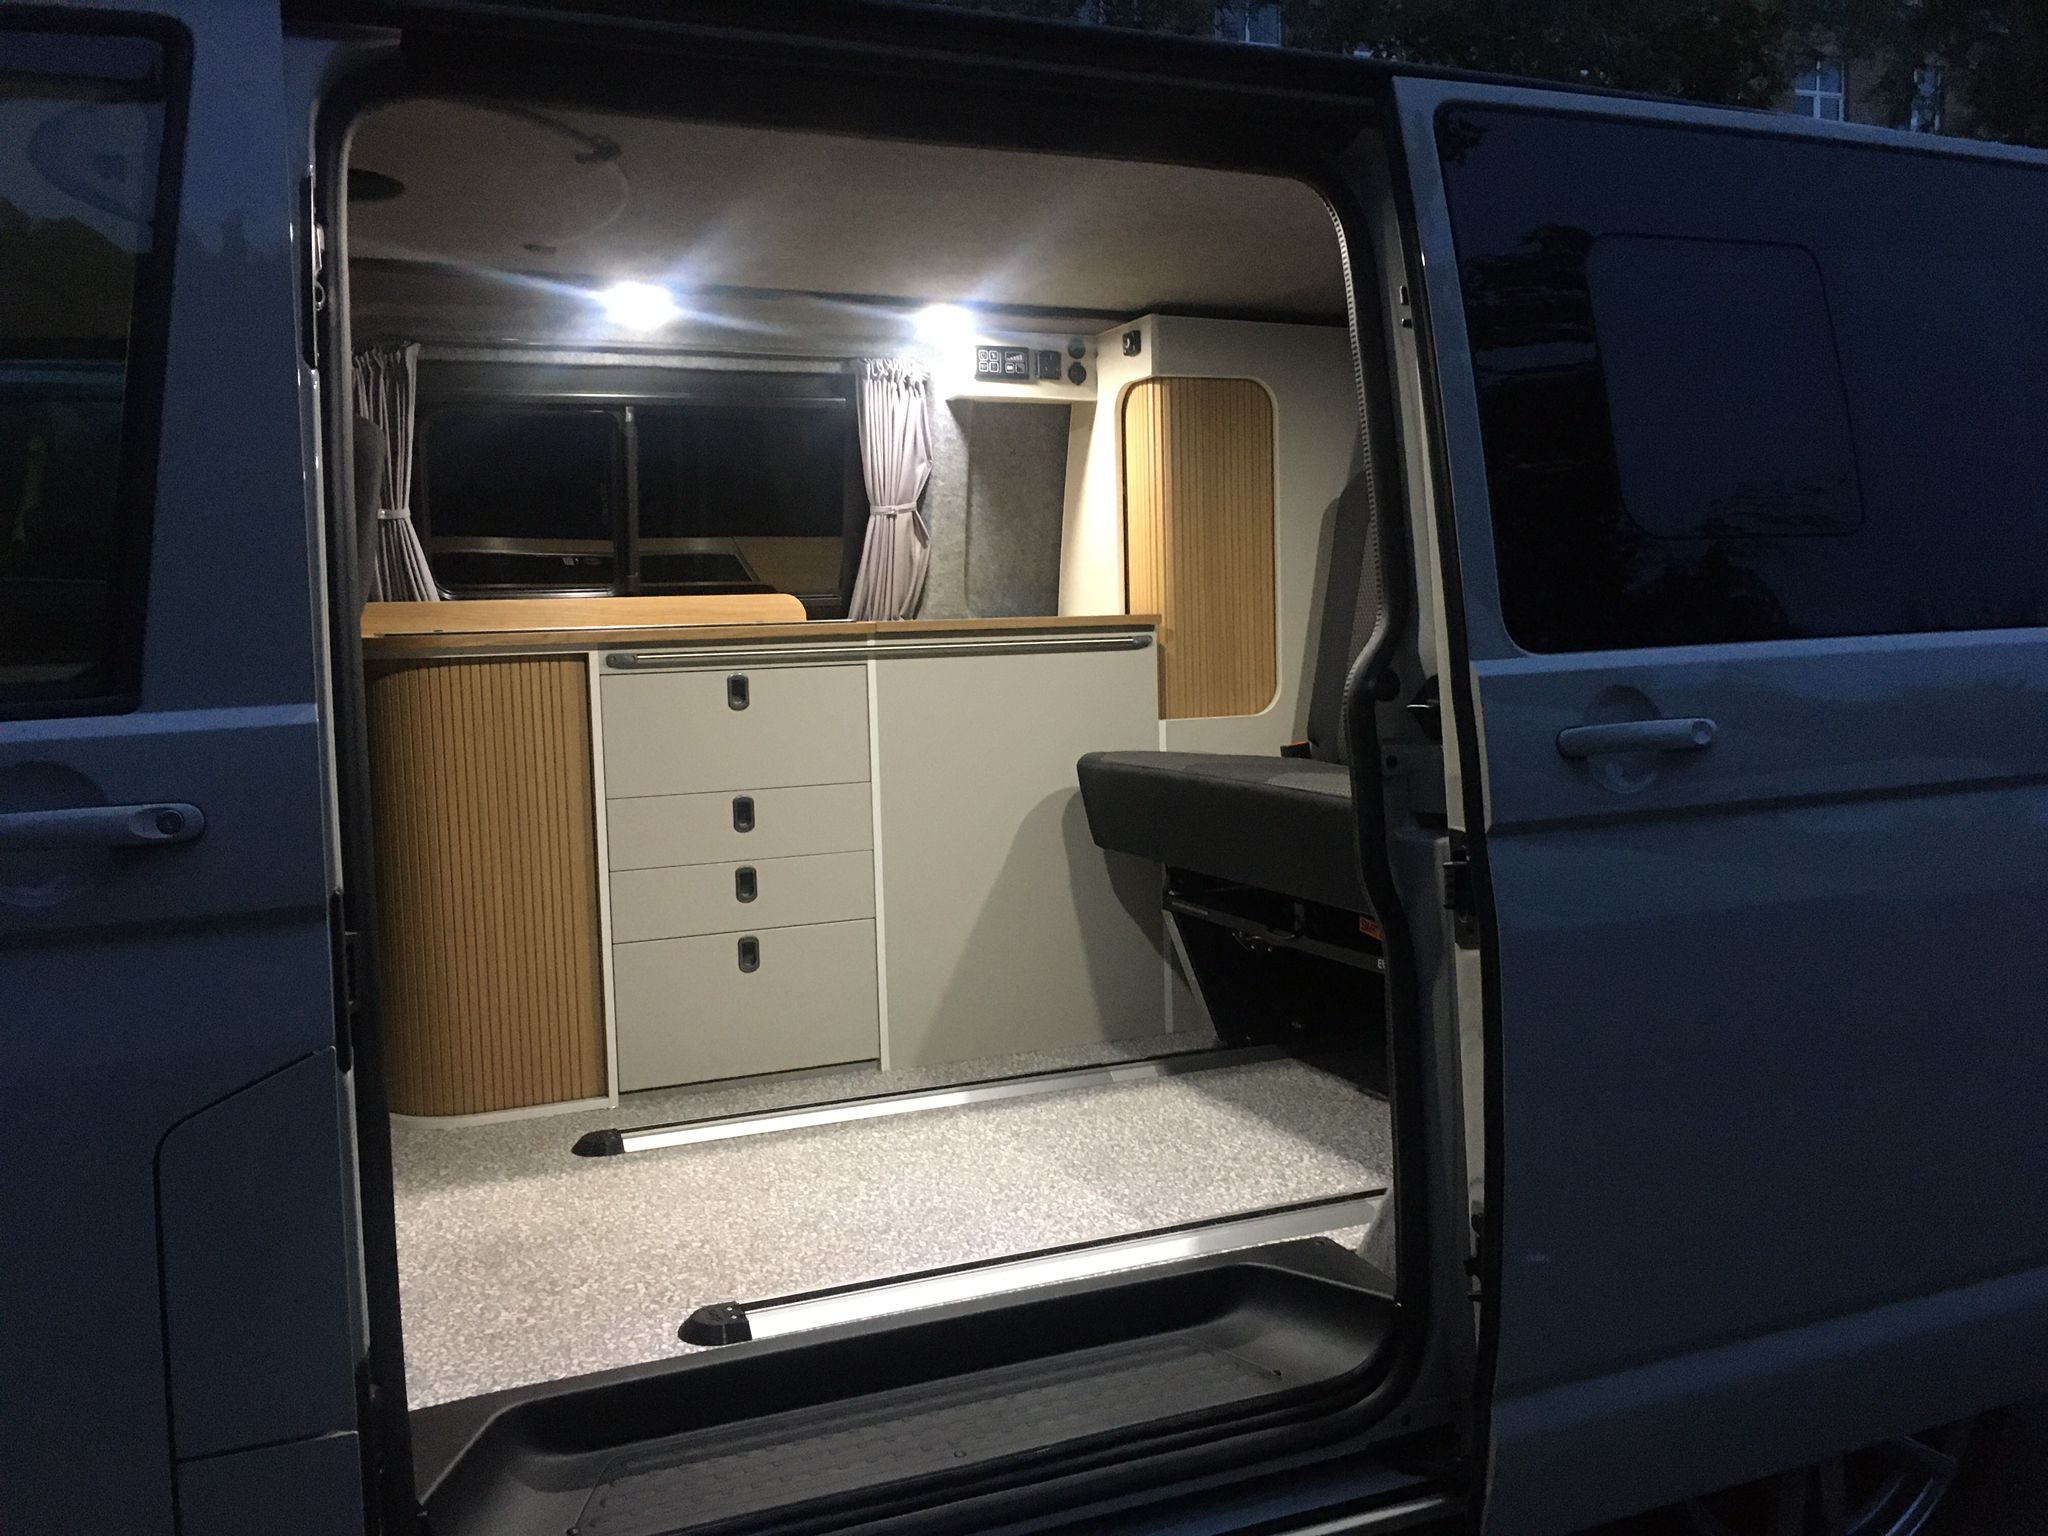 Level Up Your Campervan With Our Interior Design Guide 